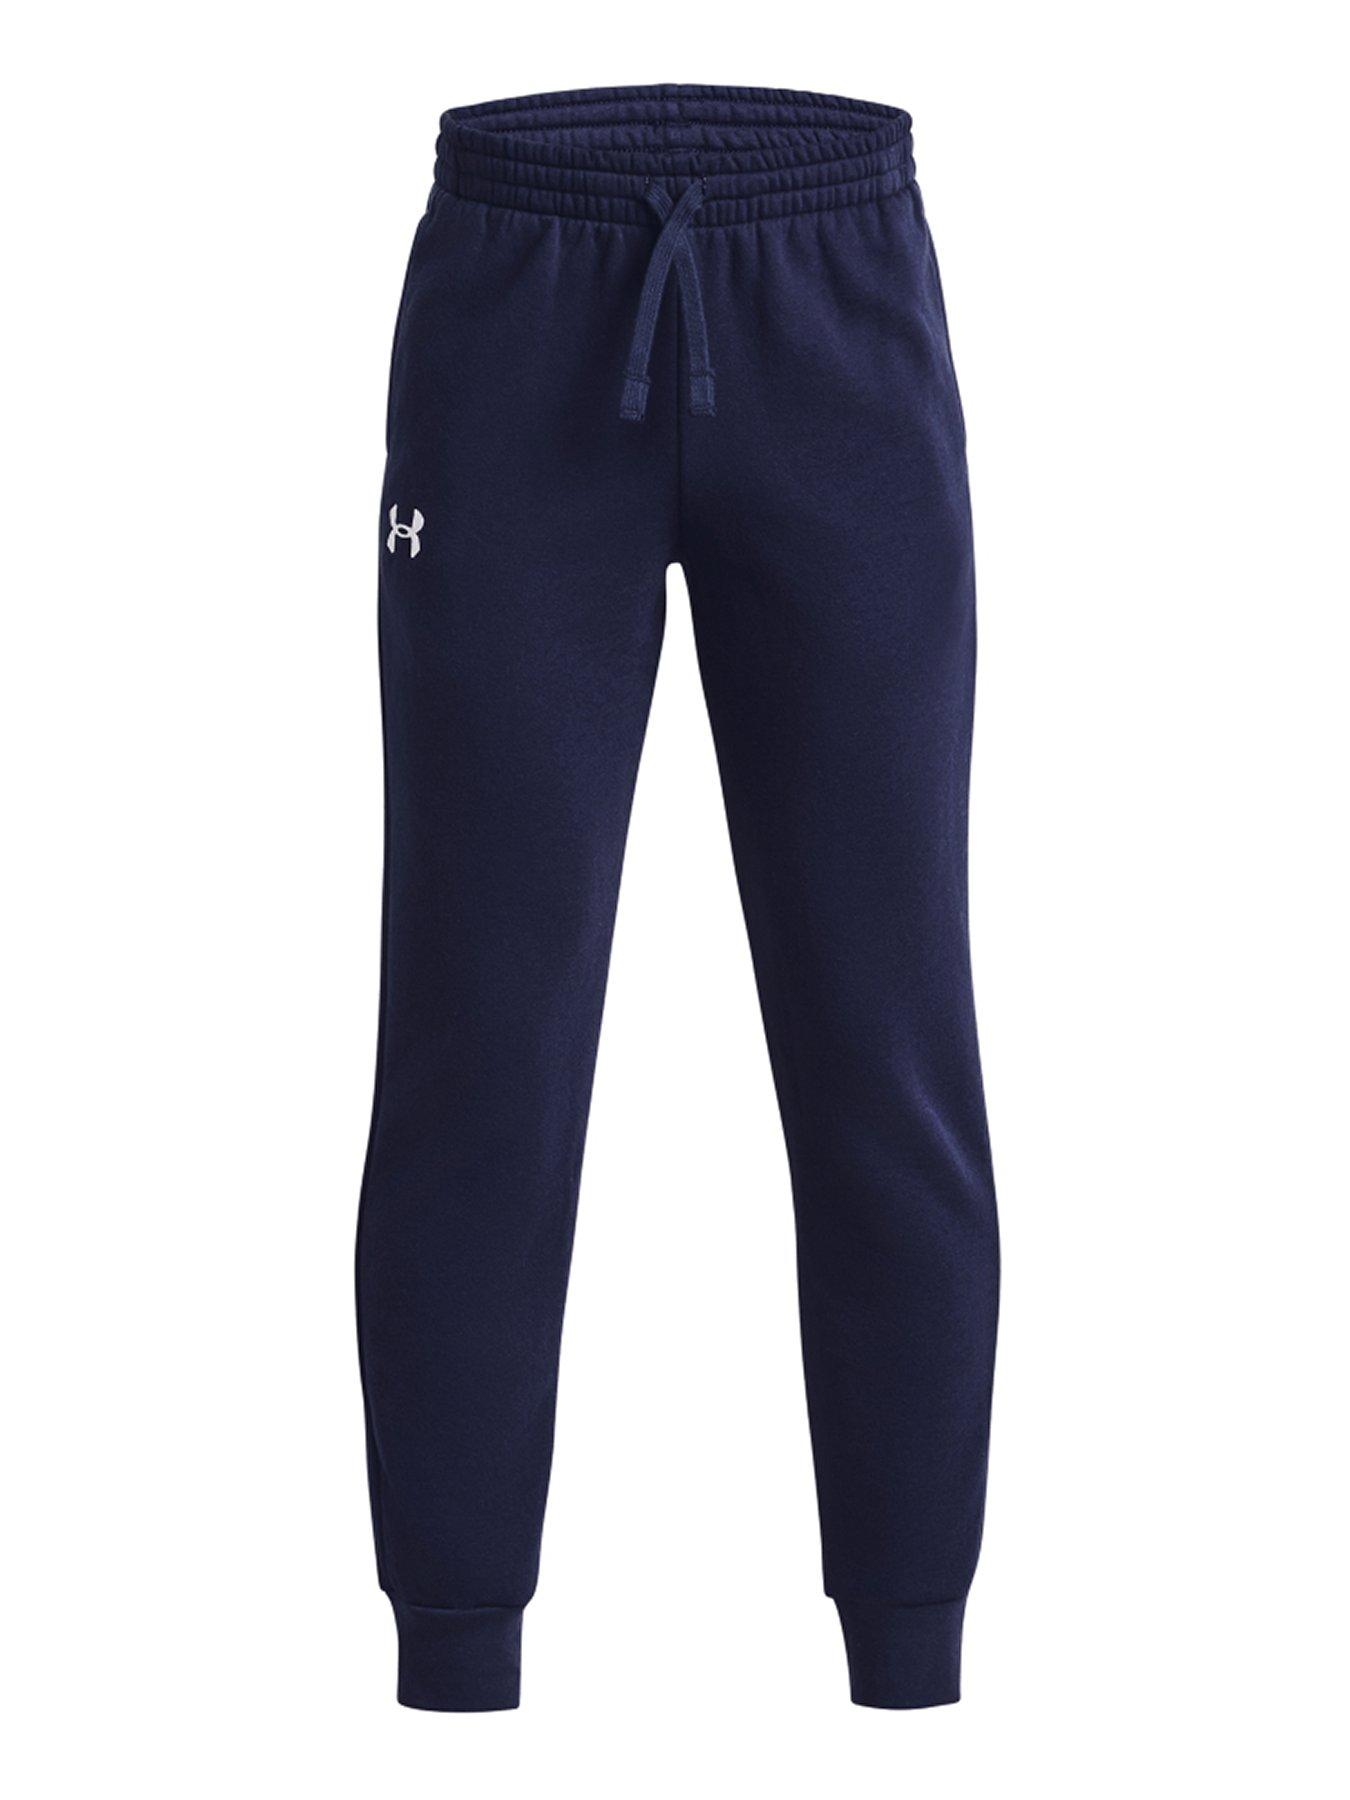 UNDER ARMOUR Boys Challenger Knit Shorts - Navy